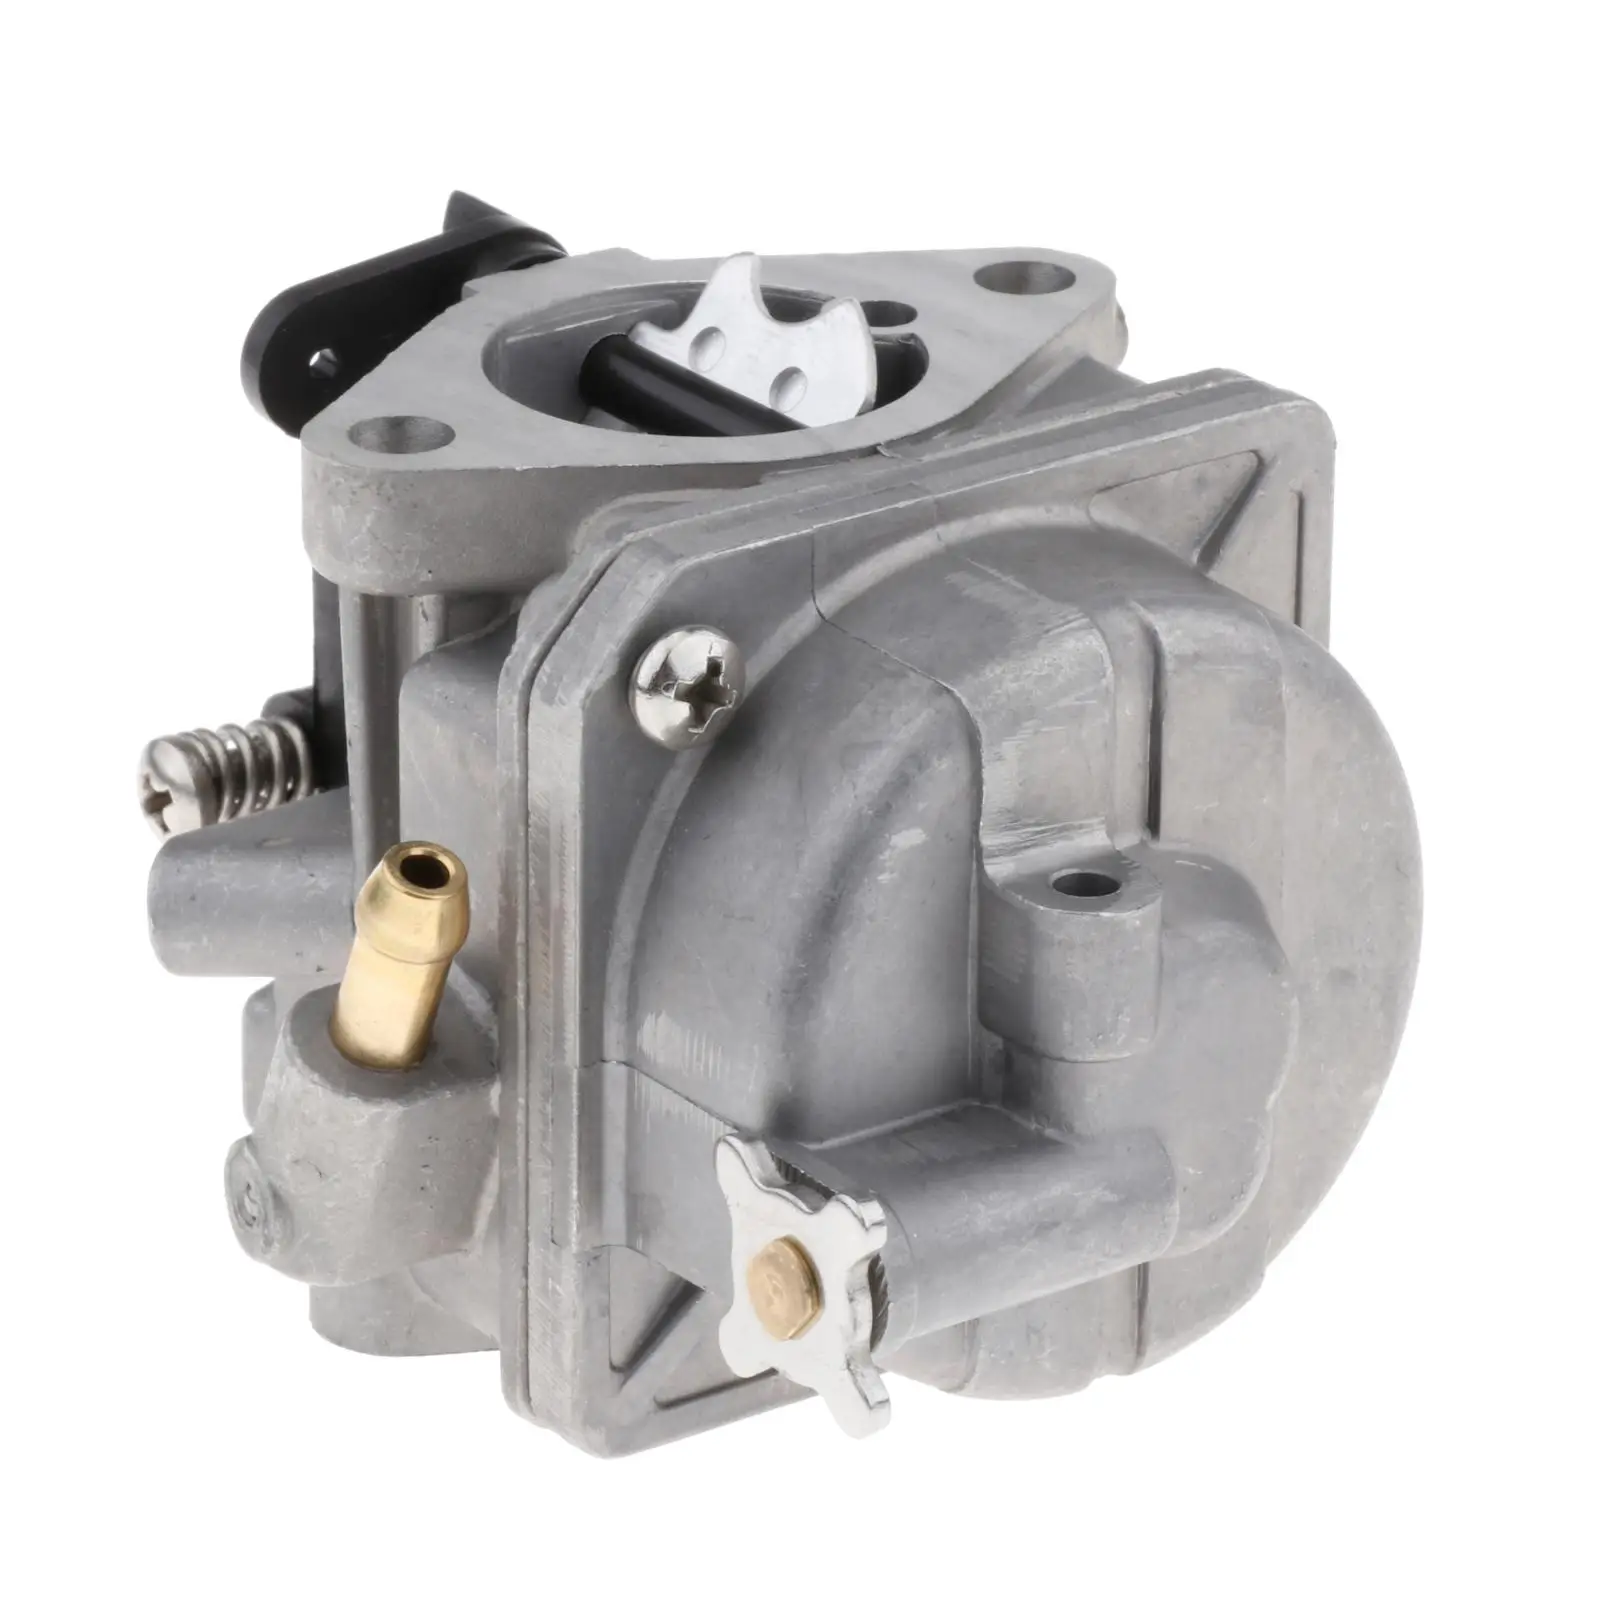 Boat Motor Outboard Engine Premium Quality 16100-ZV1-A00 Carburetor Carb Assy for Honda BC05B BF 5 HP